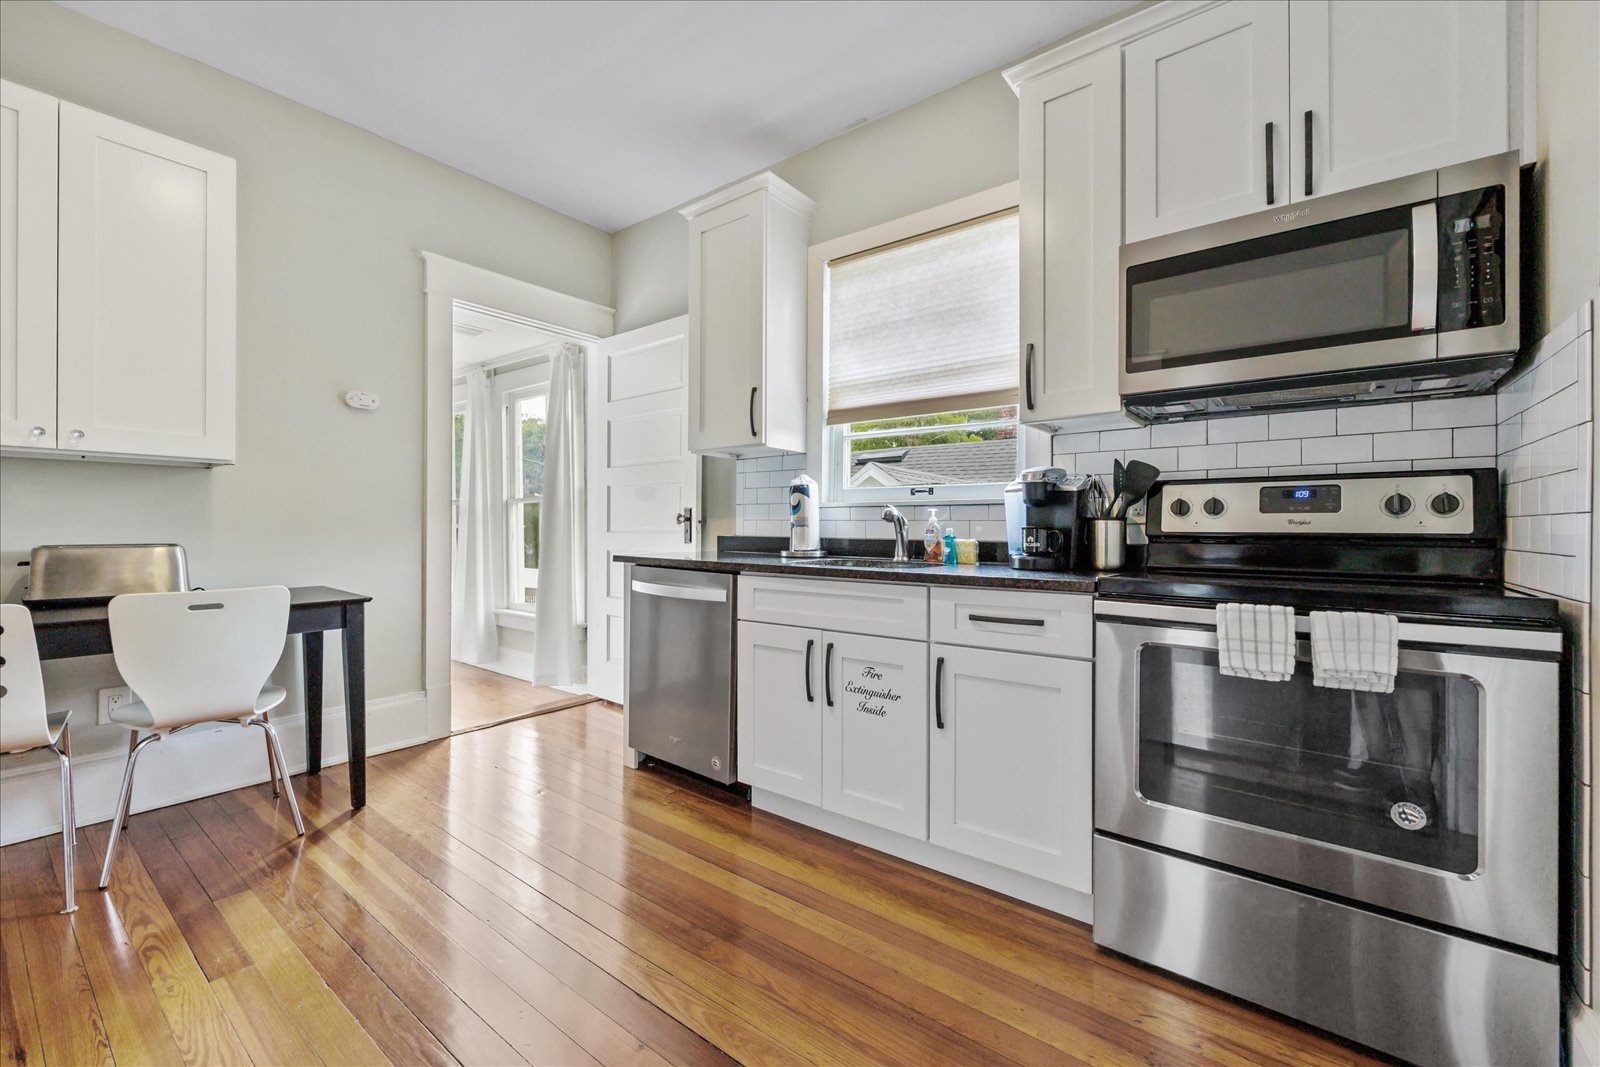 Unit A – The sunny, eat-in kitchen offers wonderful amenities & ample space